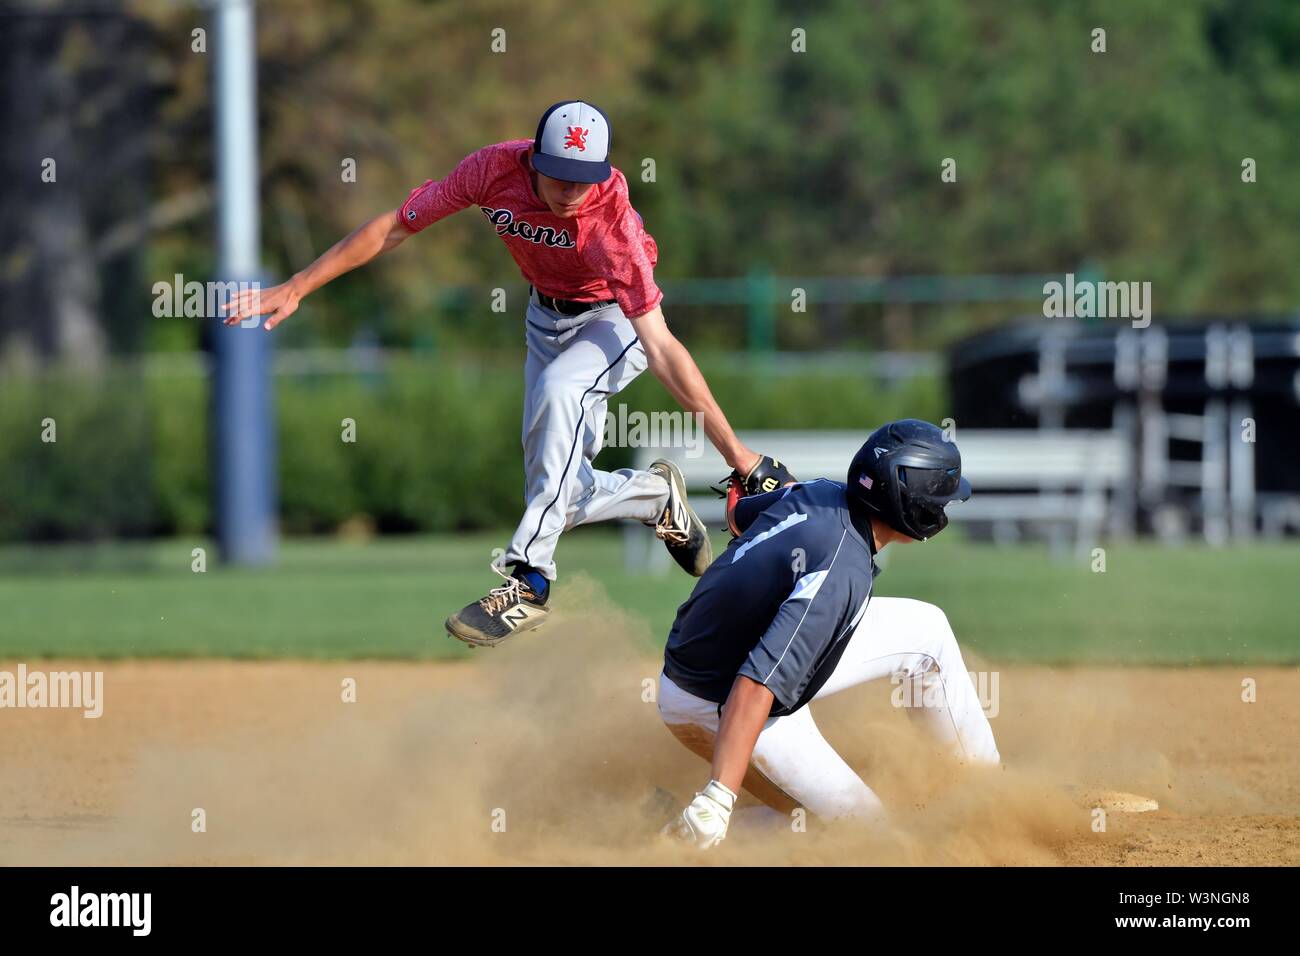 Runner sliding safely into second base as the second baseman made a leaping tag on a pick-off play. USA. Stock Photo